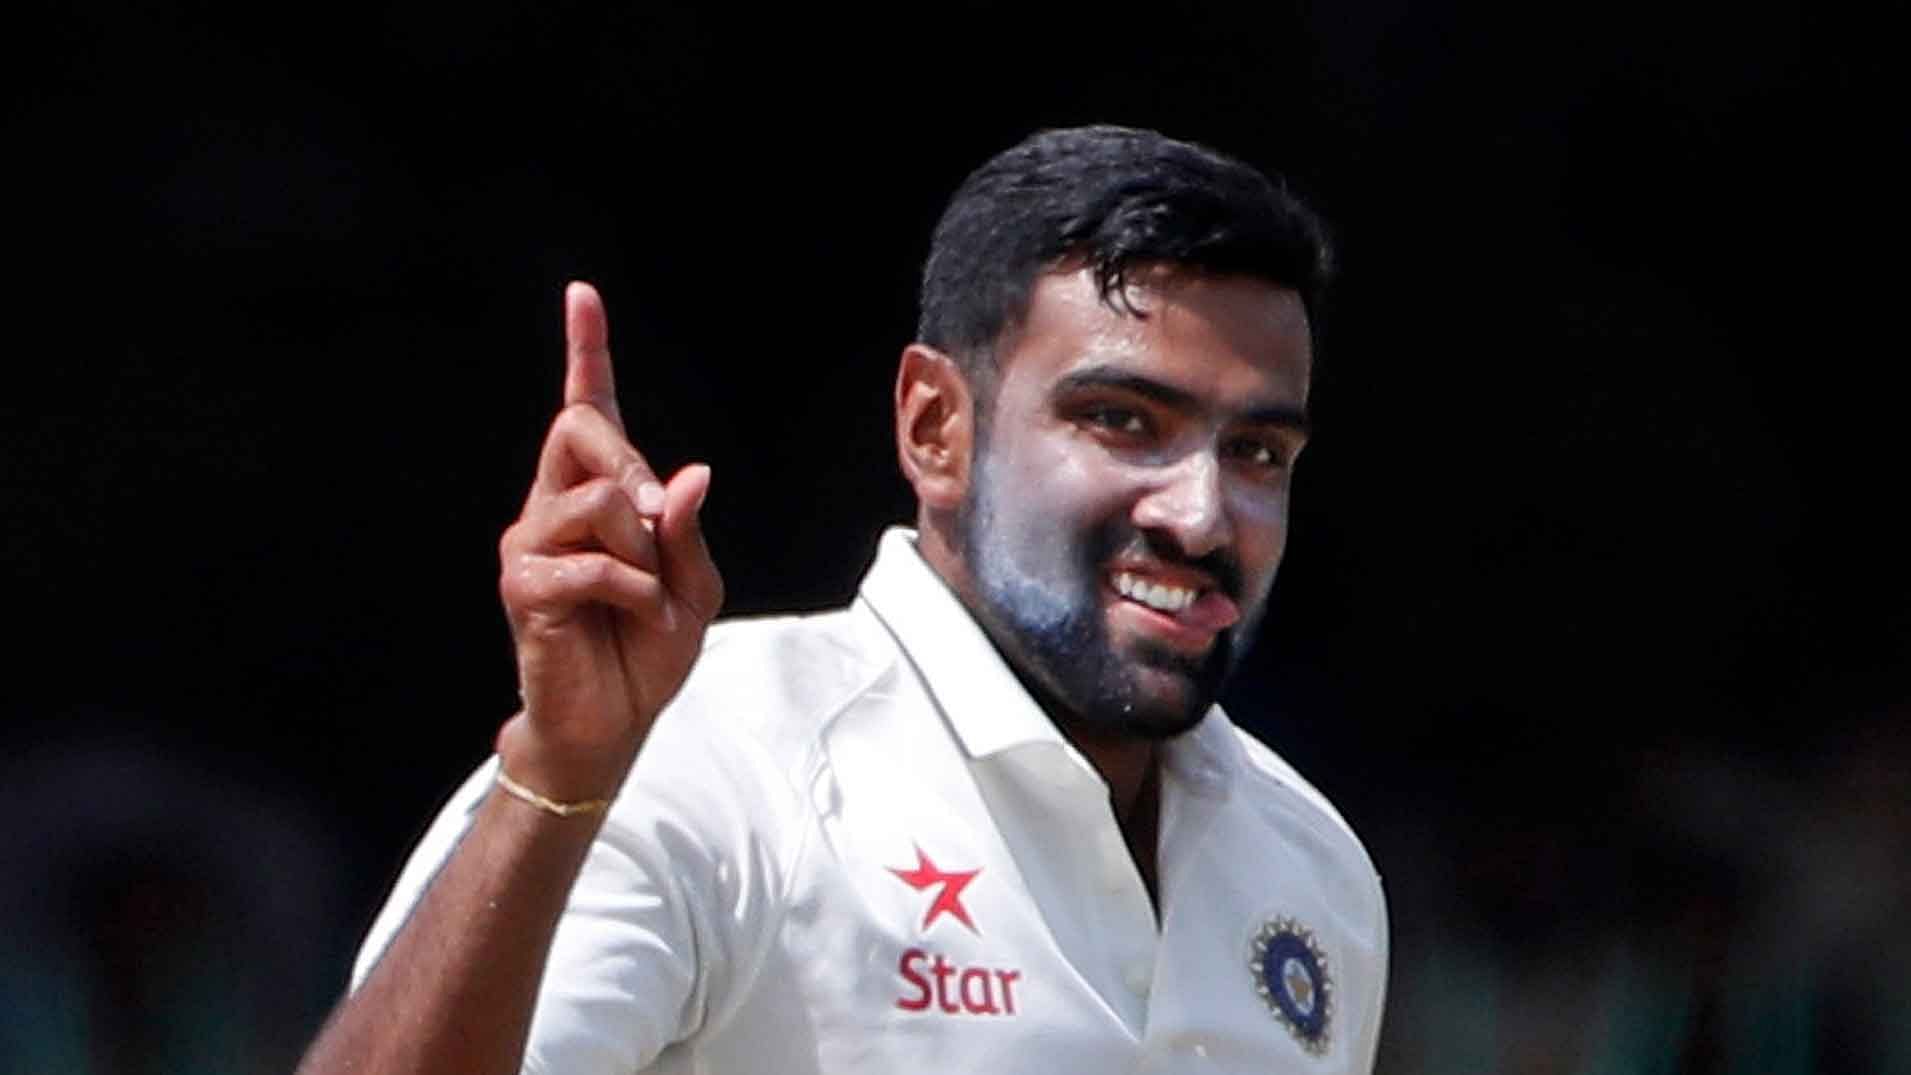 Ashwin talked about how injuries are a problem that have plagued all players and his also shouldn’t be held against him.